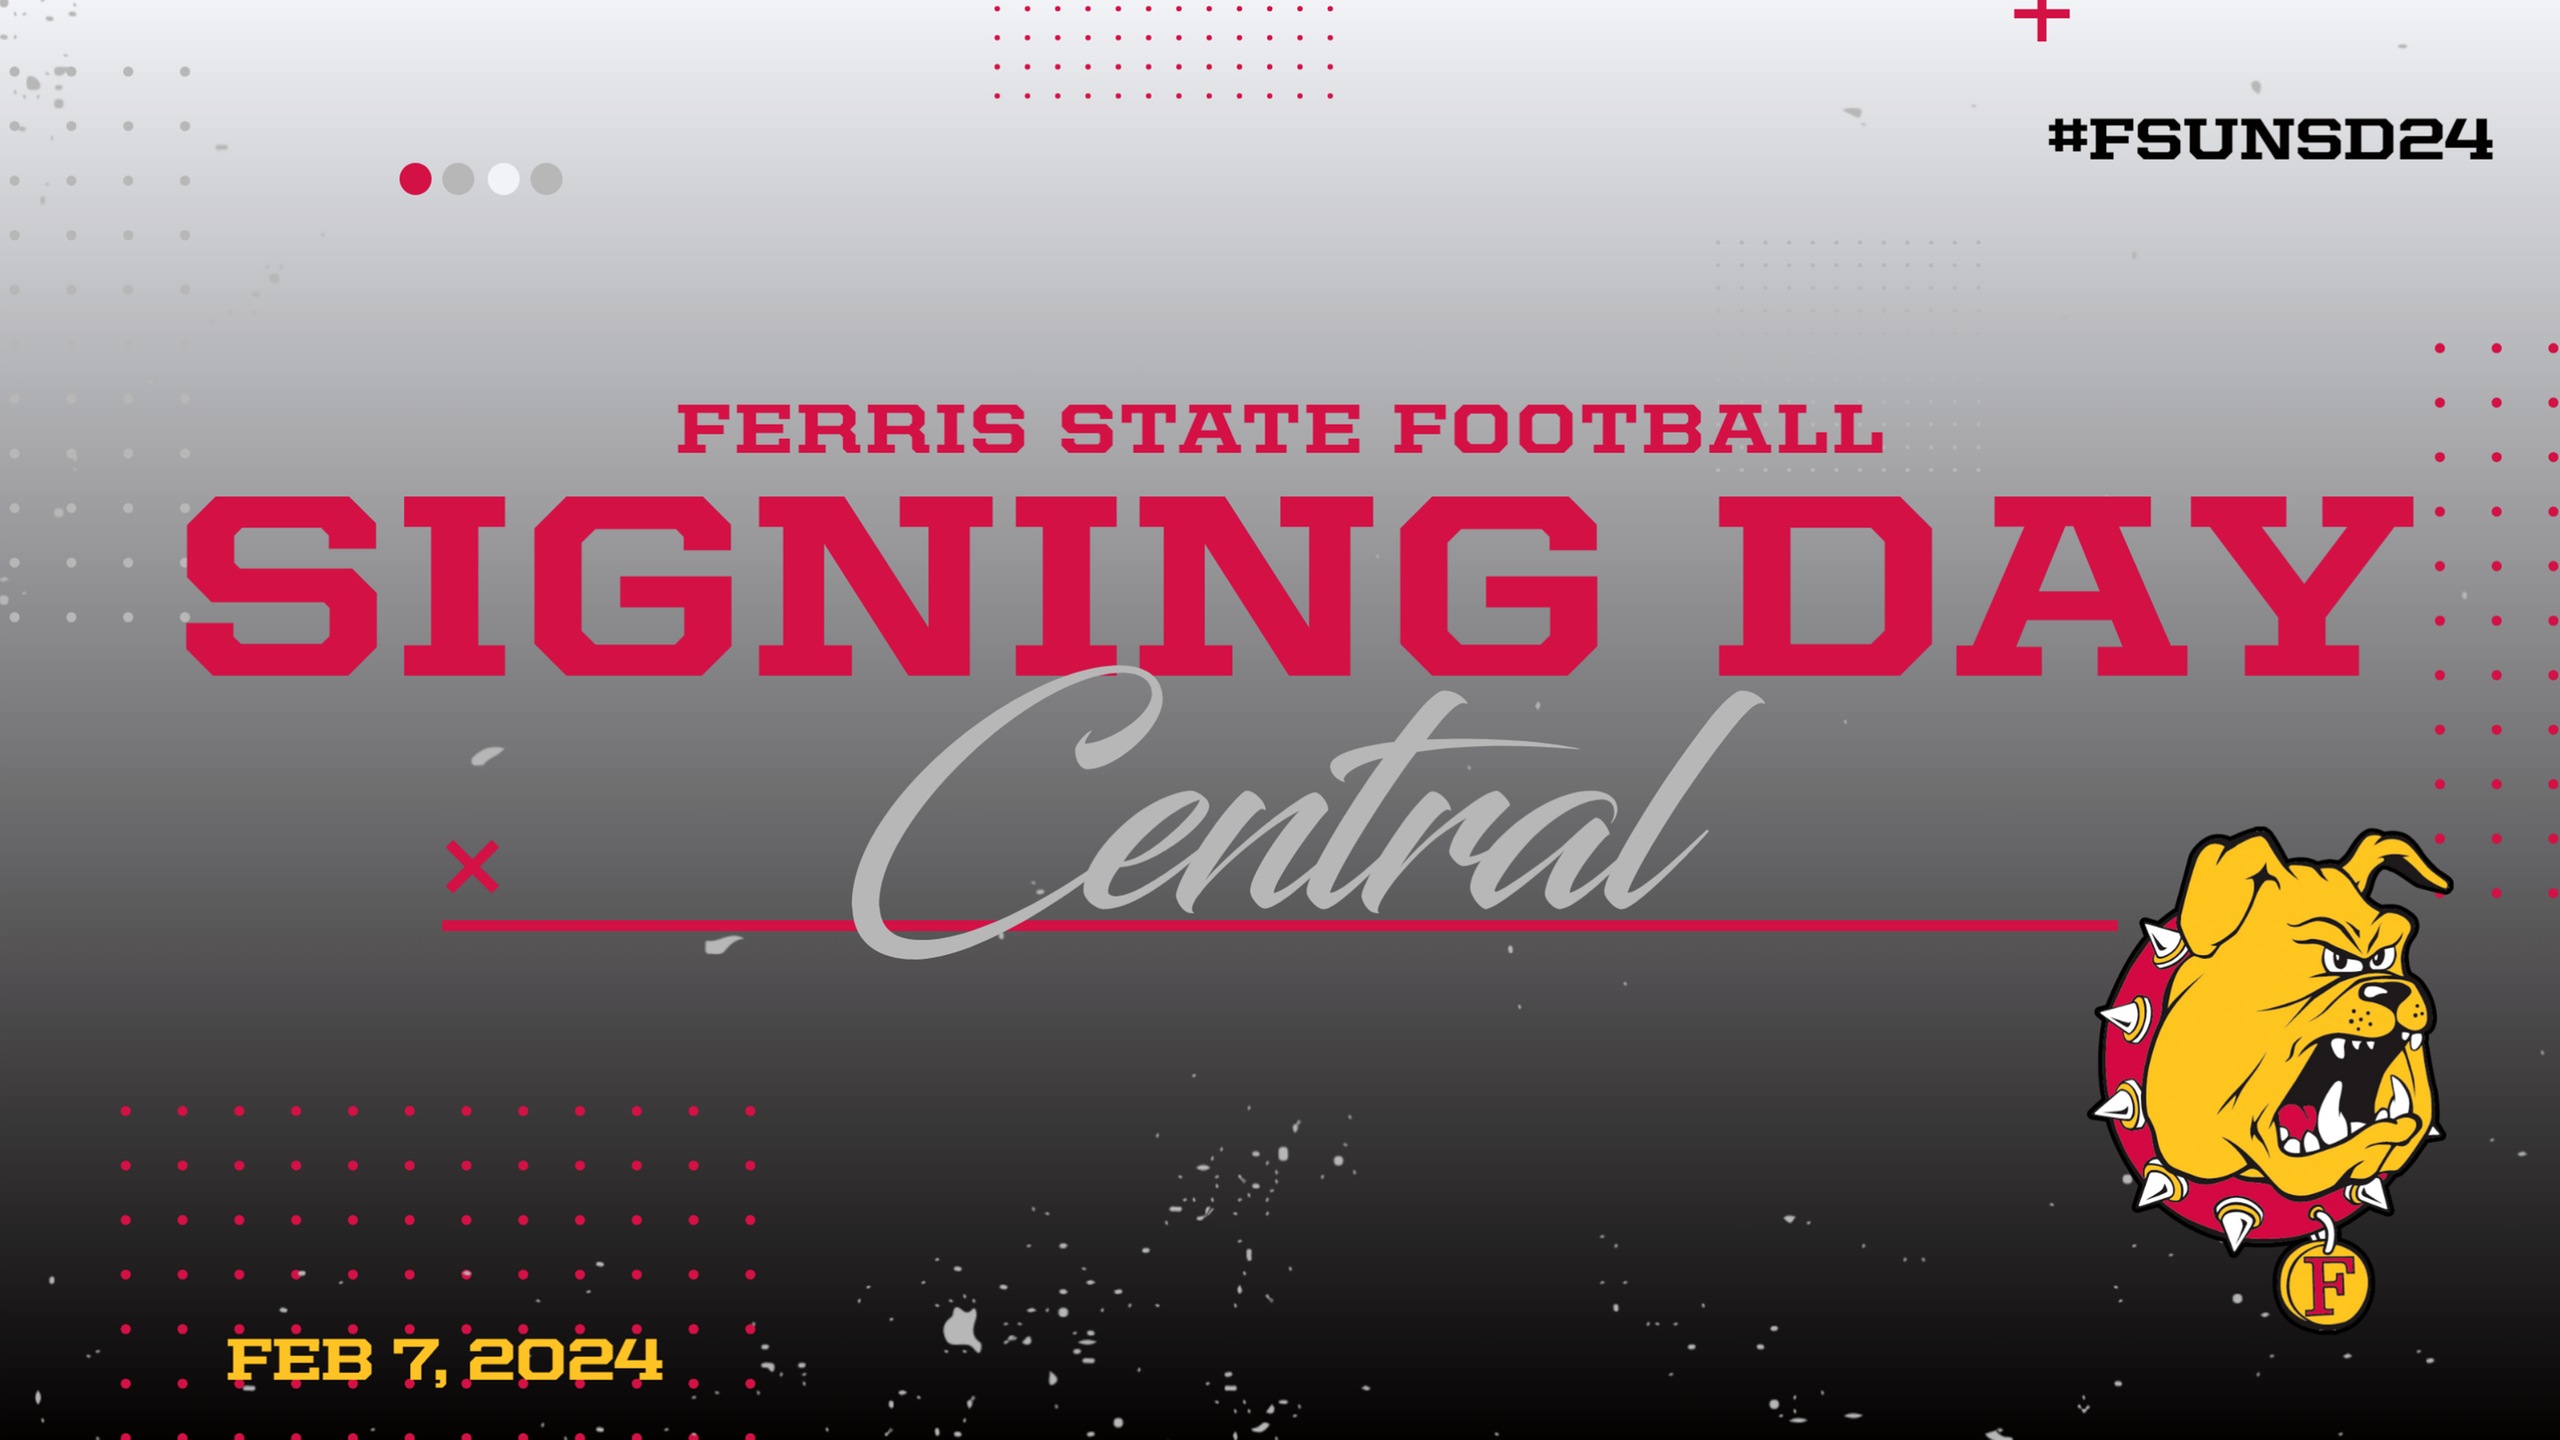 Ferris State Football - Signing Day Central